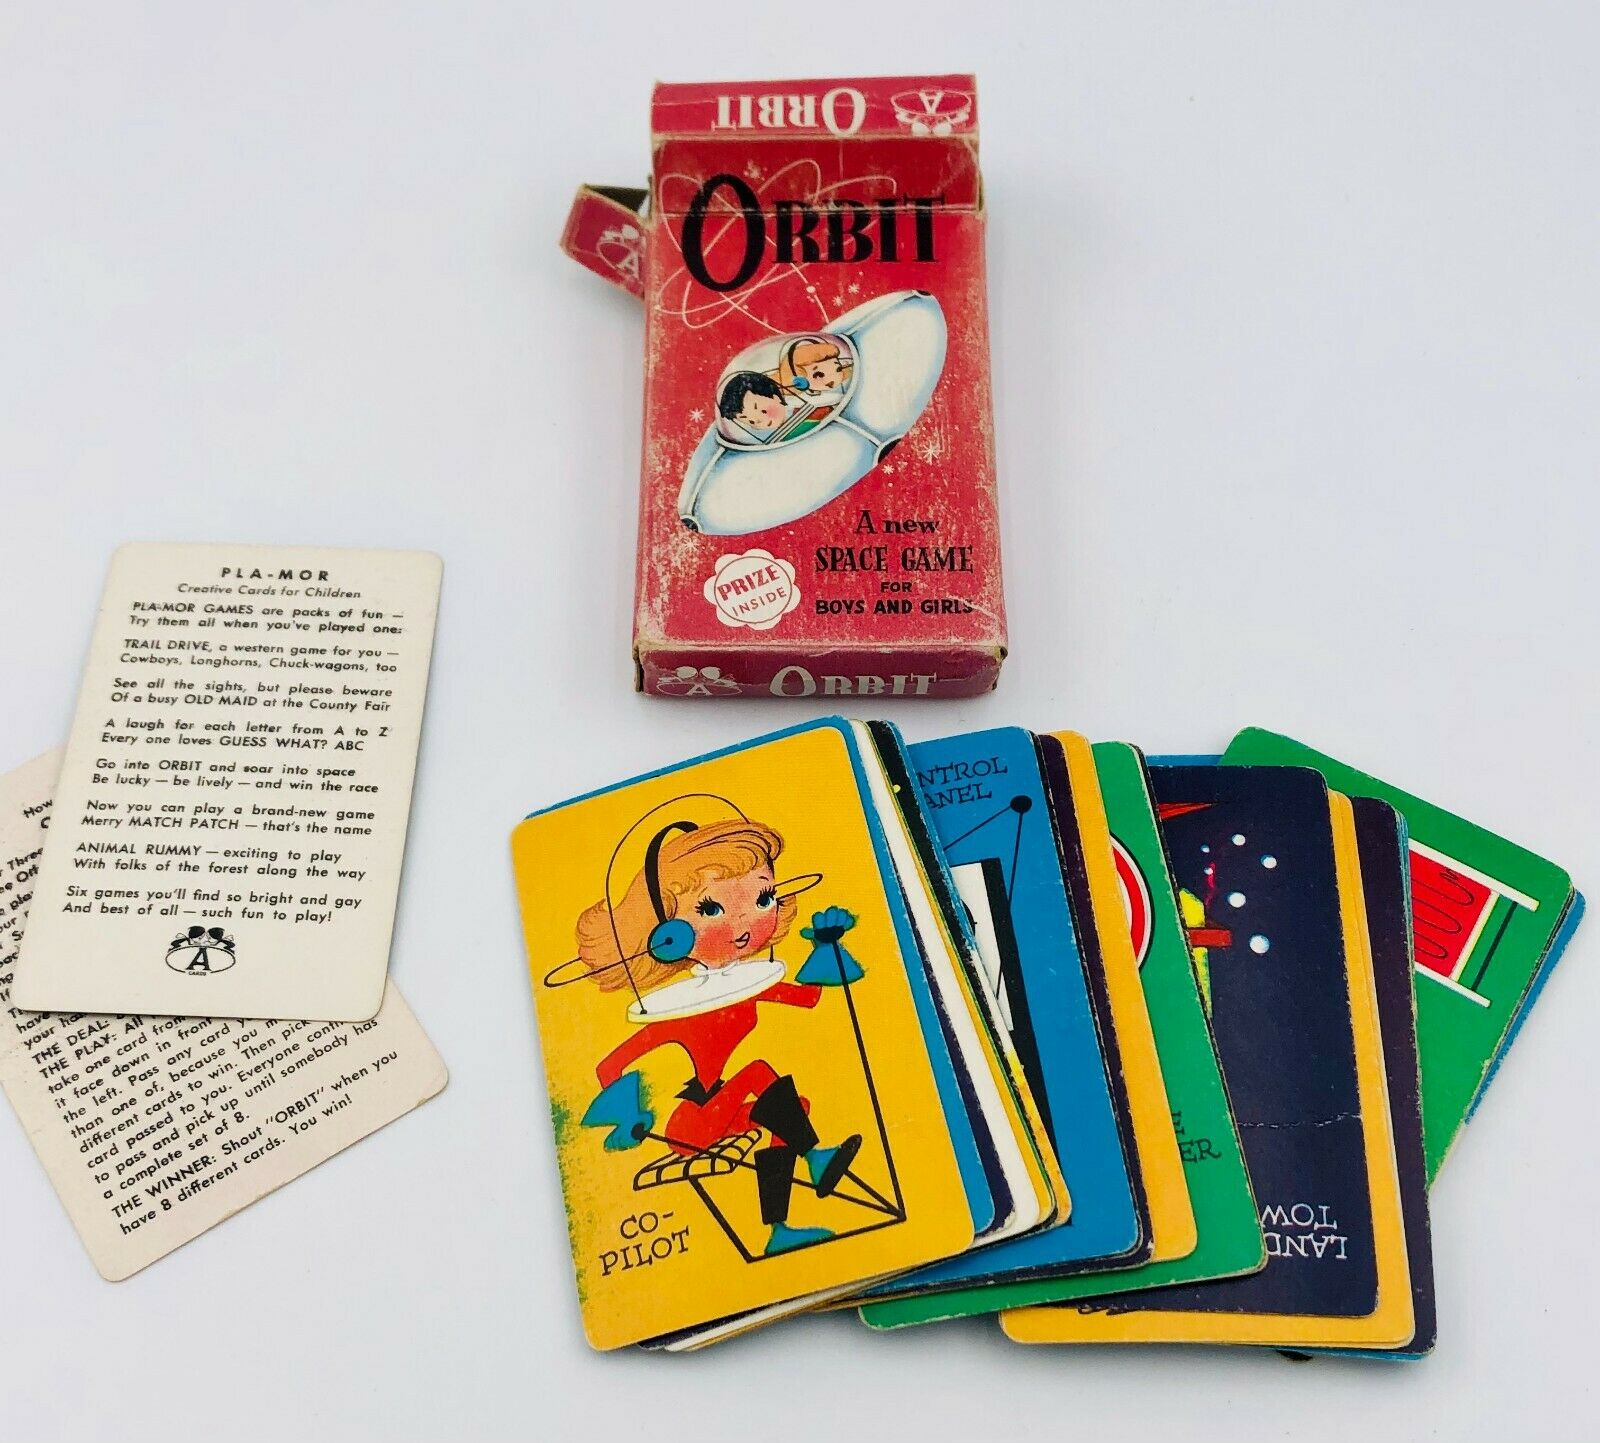 Arrco Playing Card Co. - Orbit Card Game - Complete Set Of Cards In Box